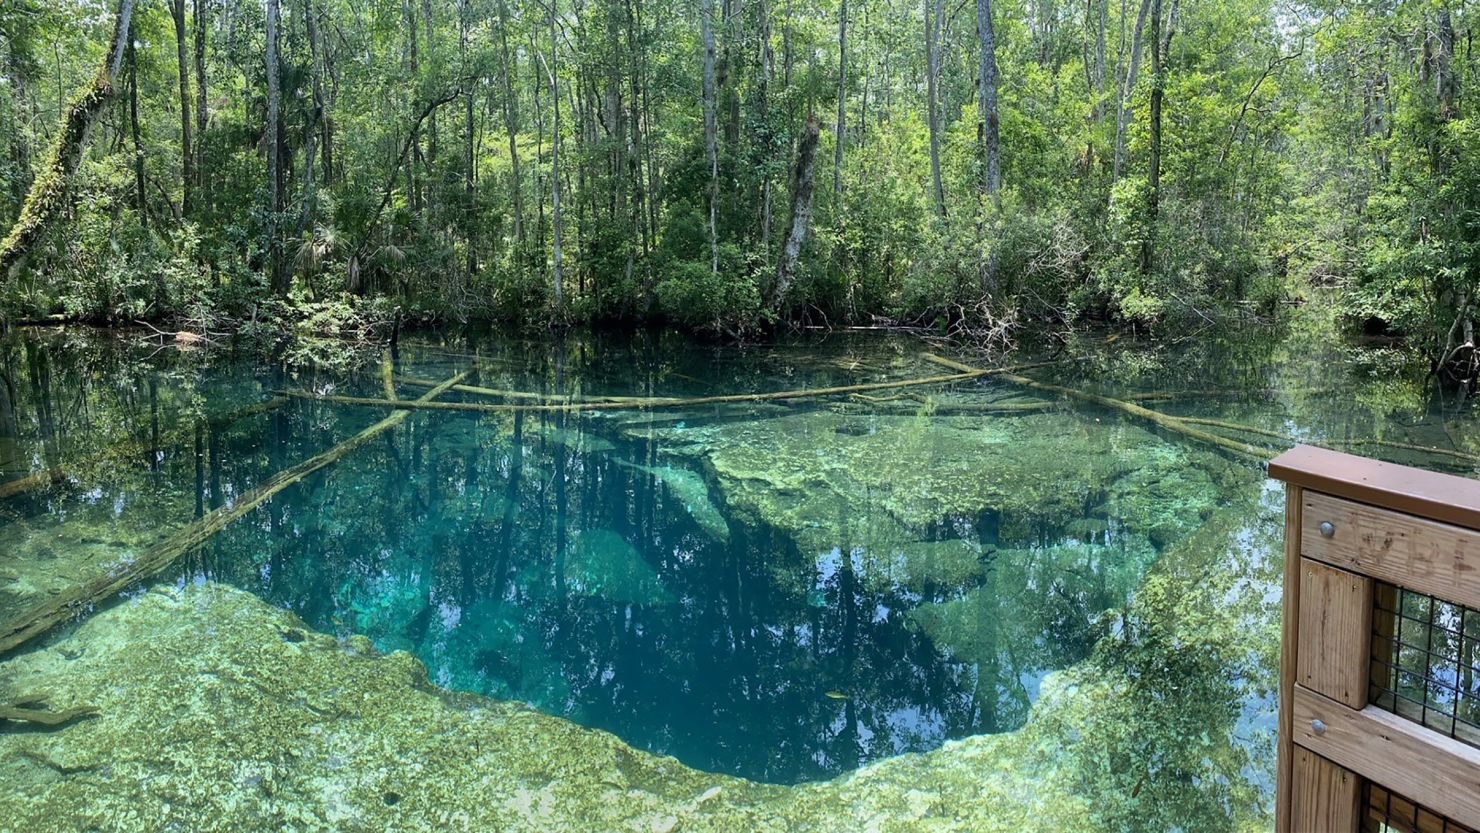 The Hernando County Sheriff's Office shared this photo of the area near the Buford Springs Cave where the two cave divers died.